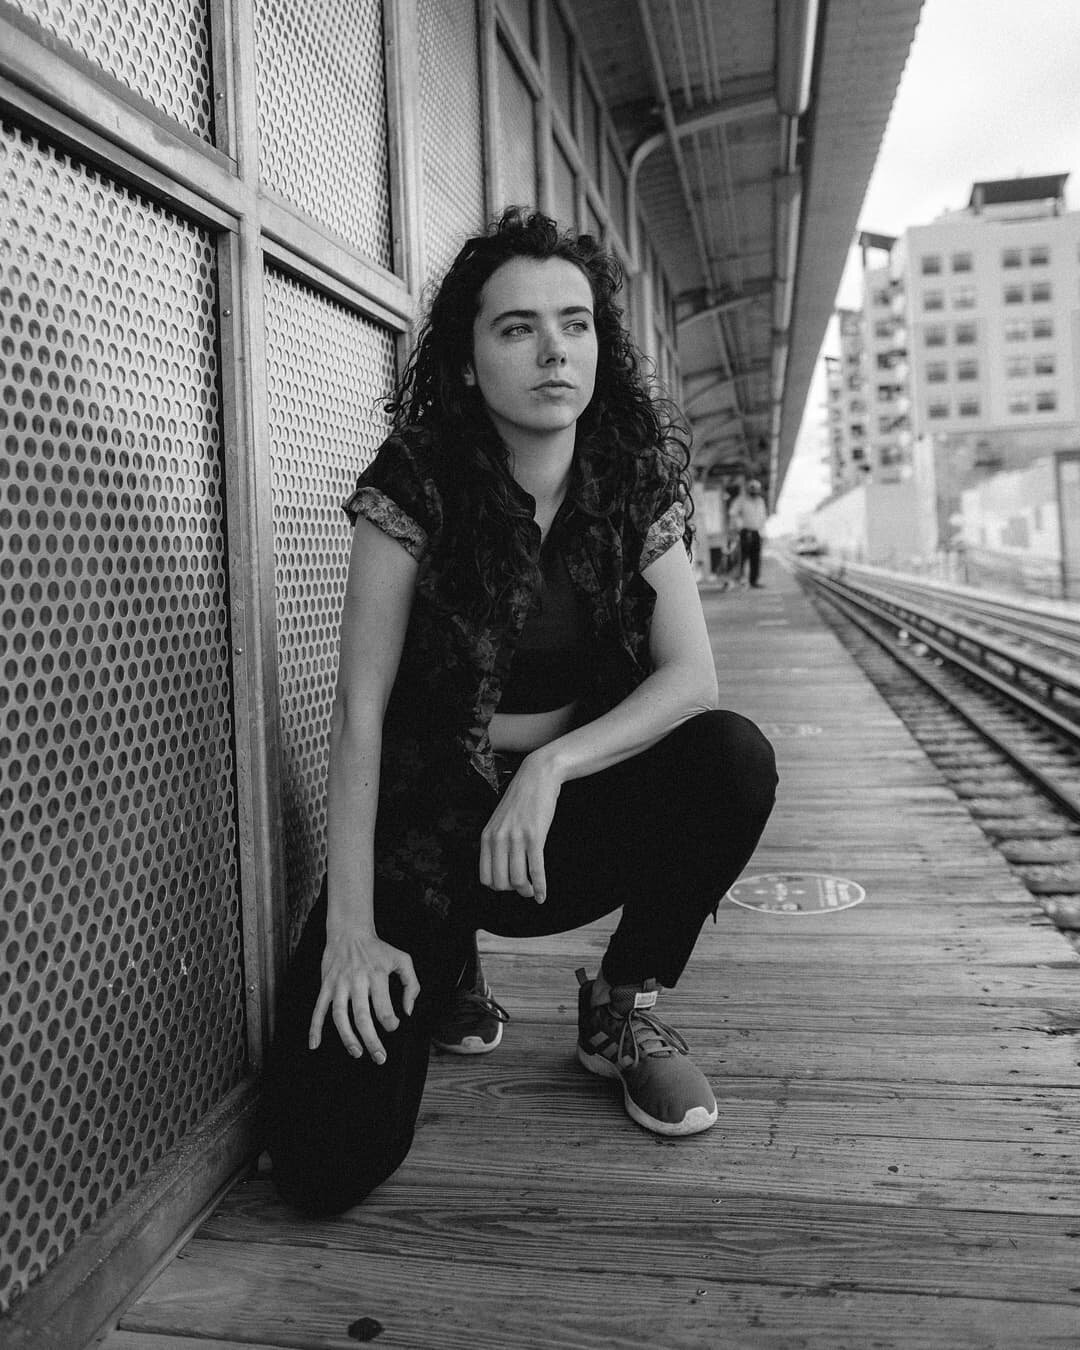 The adventures are stacking up and I'm so excited. ❤️

📷 @brian.rickey

#professionalactor #adventure #bw #chicagophotography #fightlikeagirl #create